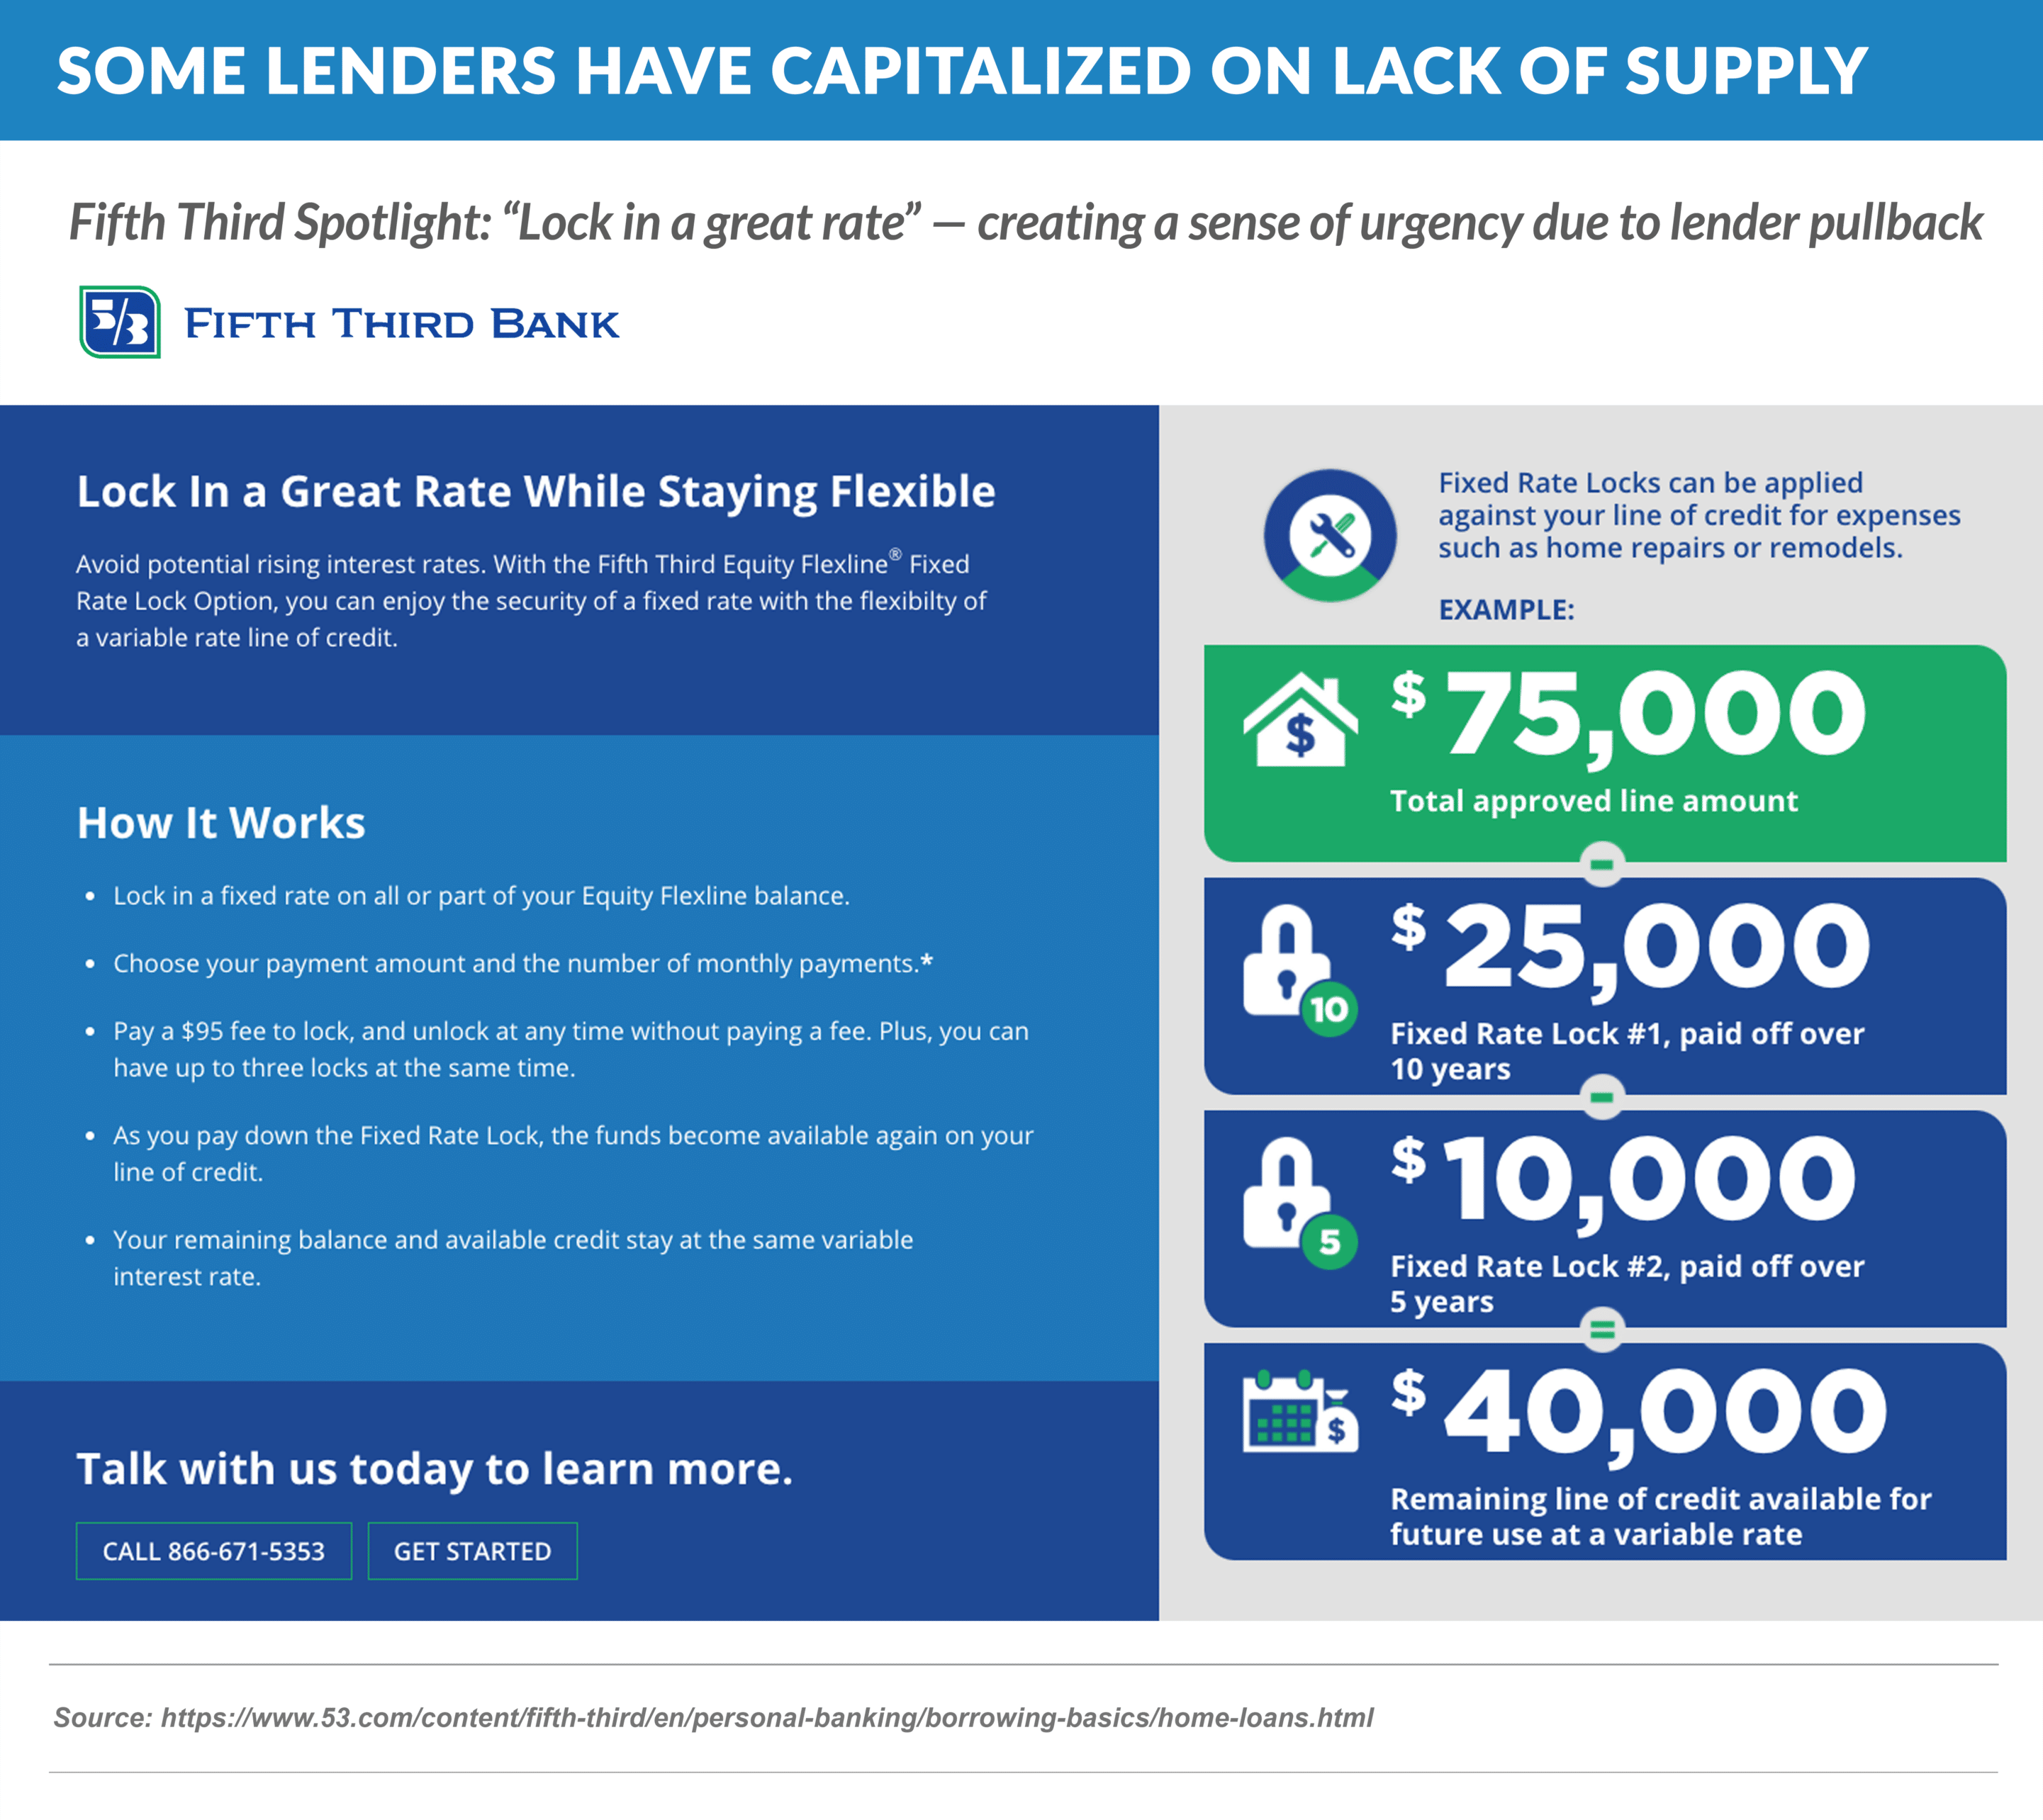 SOME LENDERS CAPITALIZING ON LACK OF SUPPLY